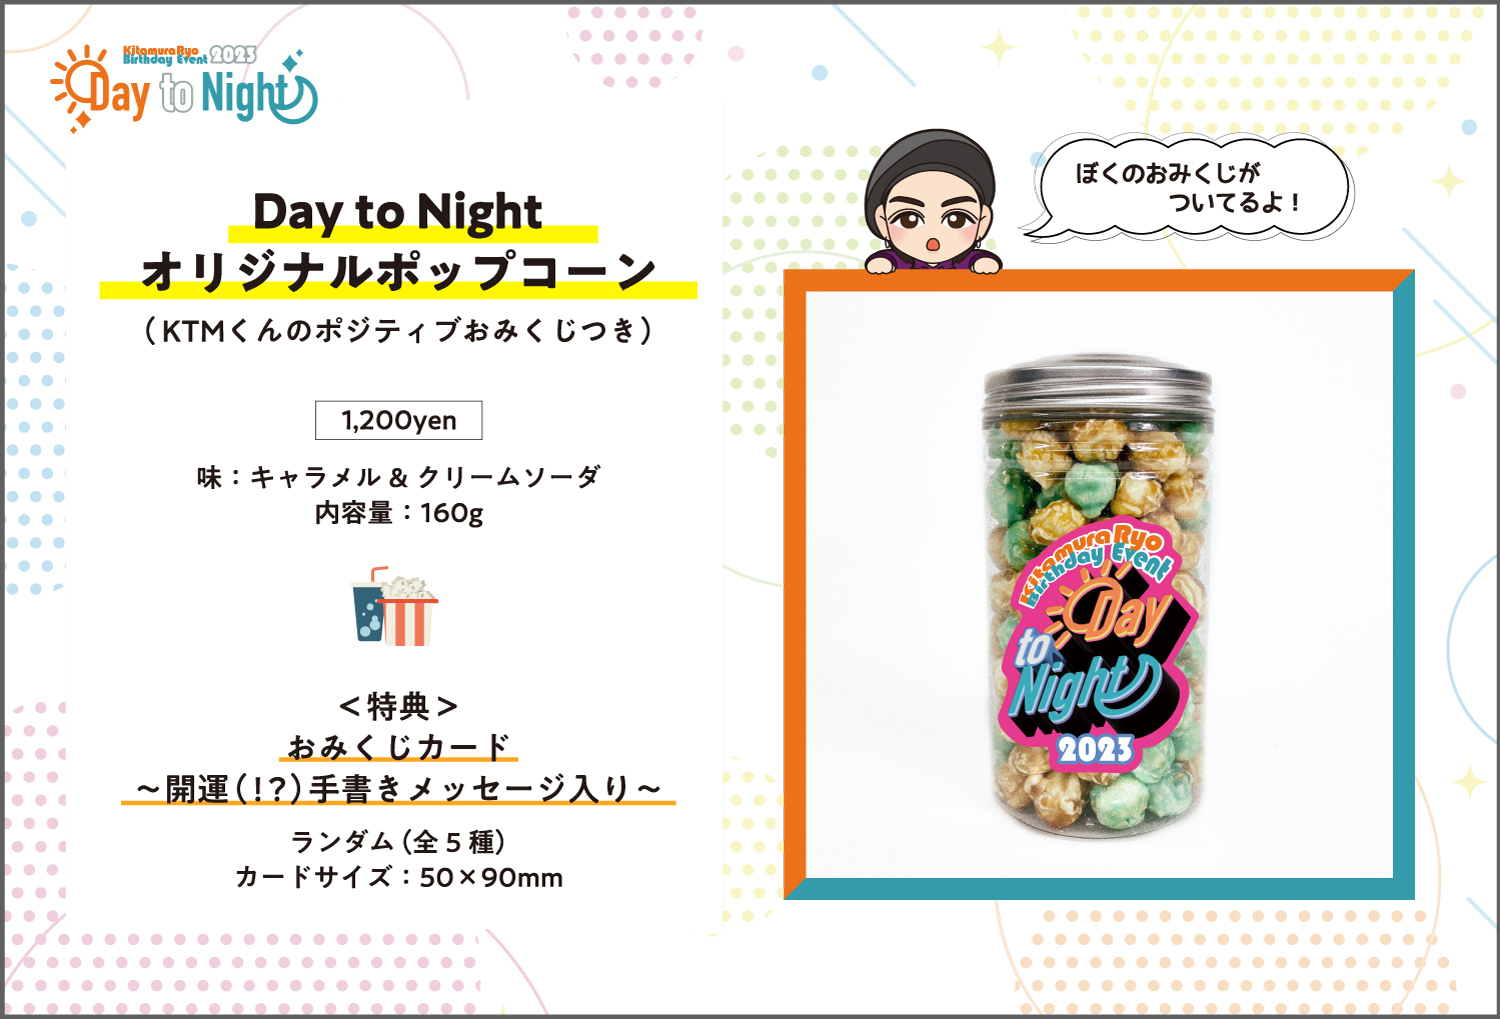 Day to Night」グッズラインナップ発表！ | 北村諒 OFFICIAL SITE